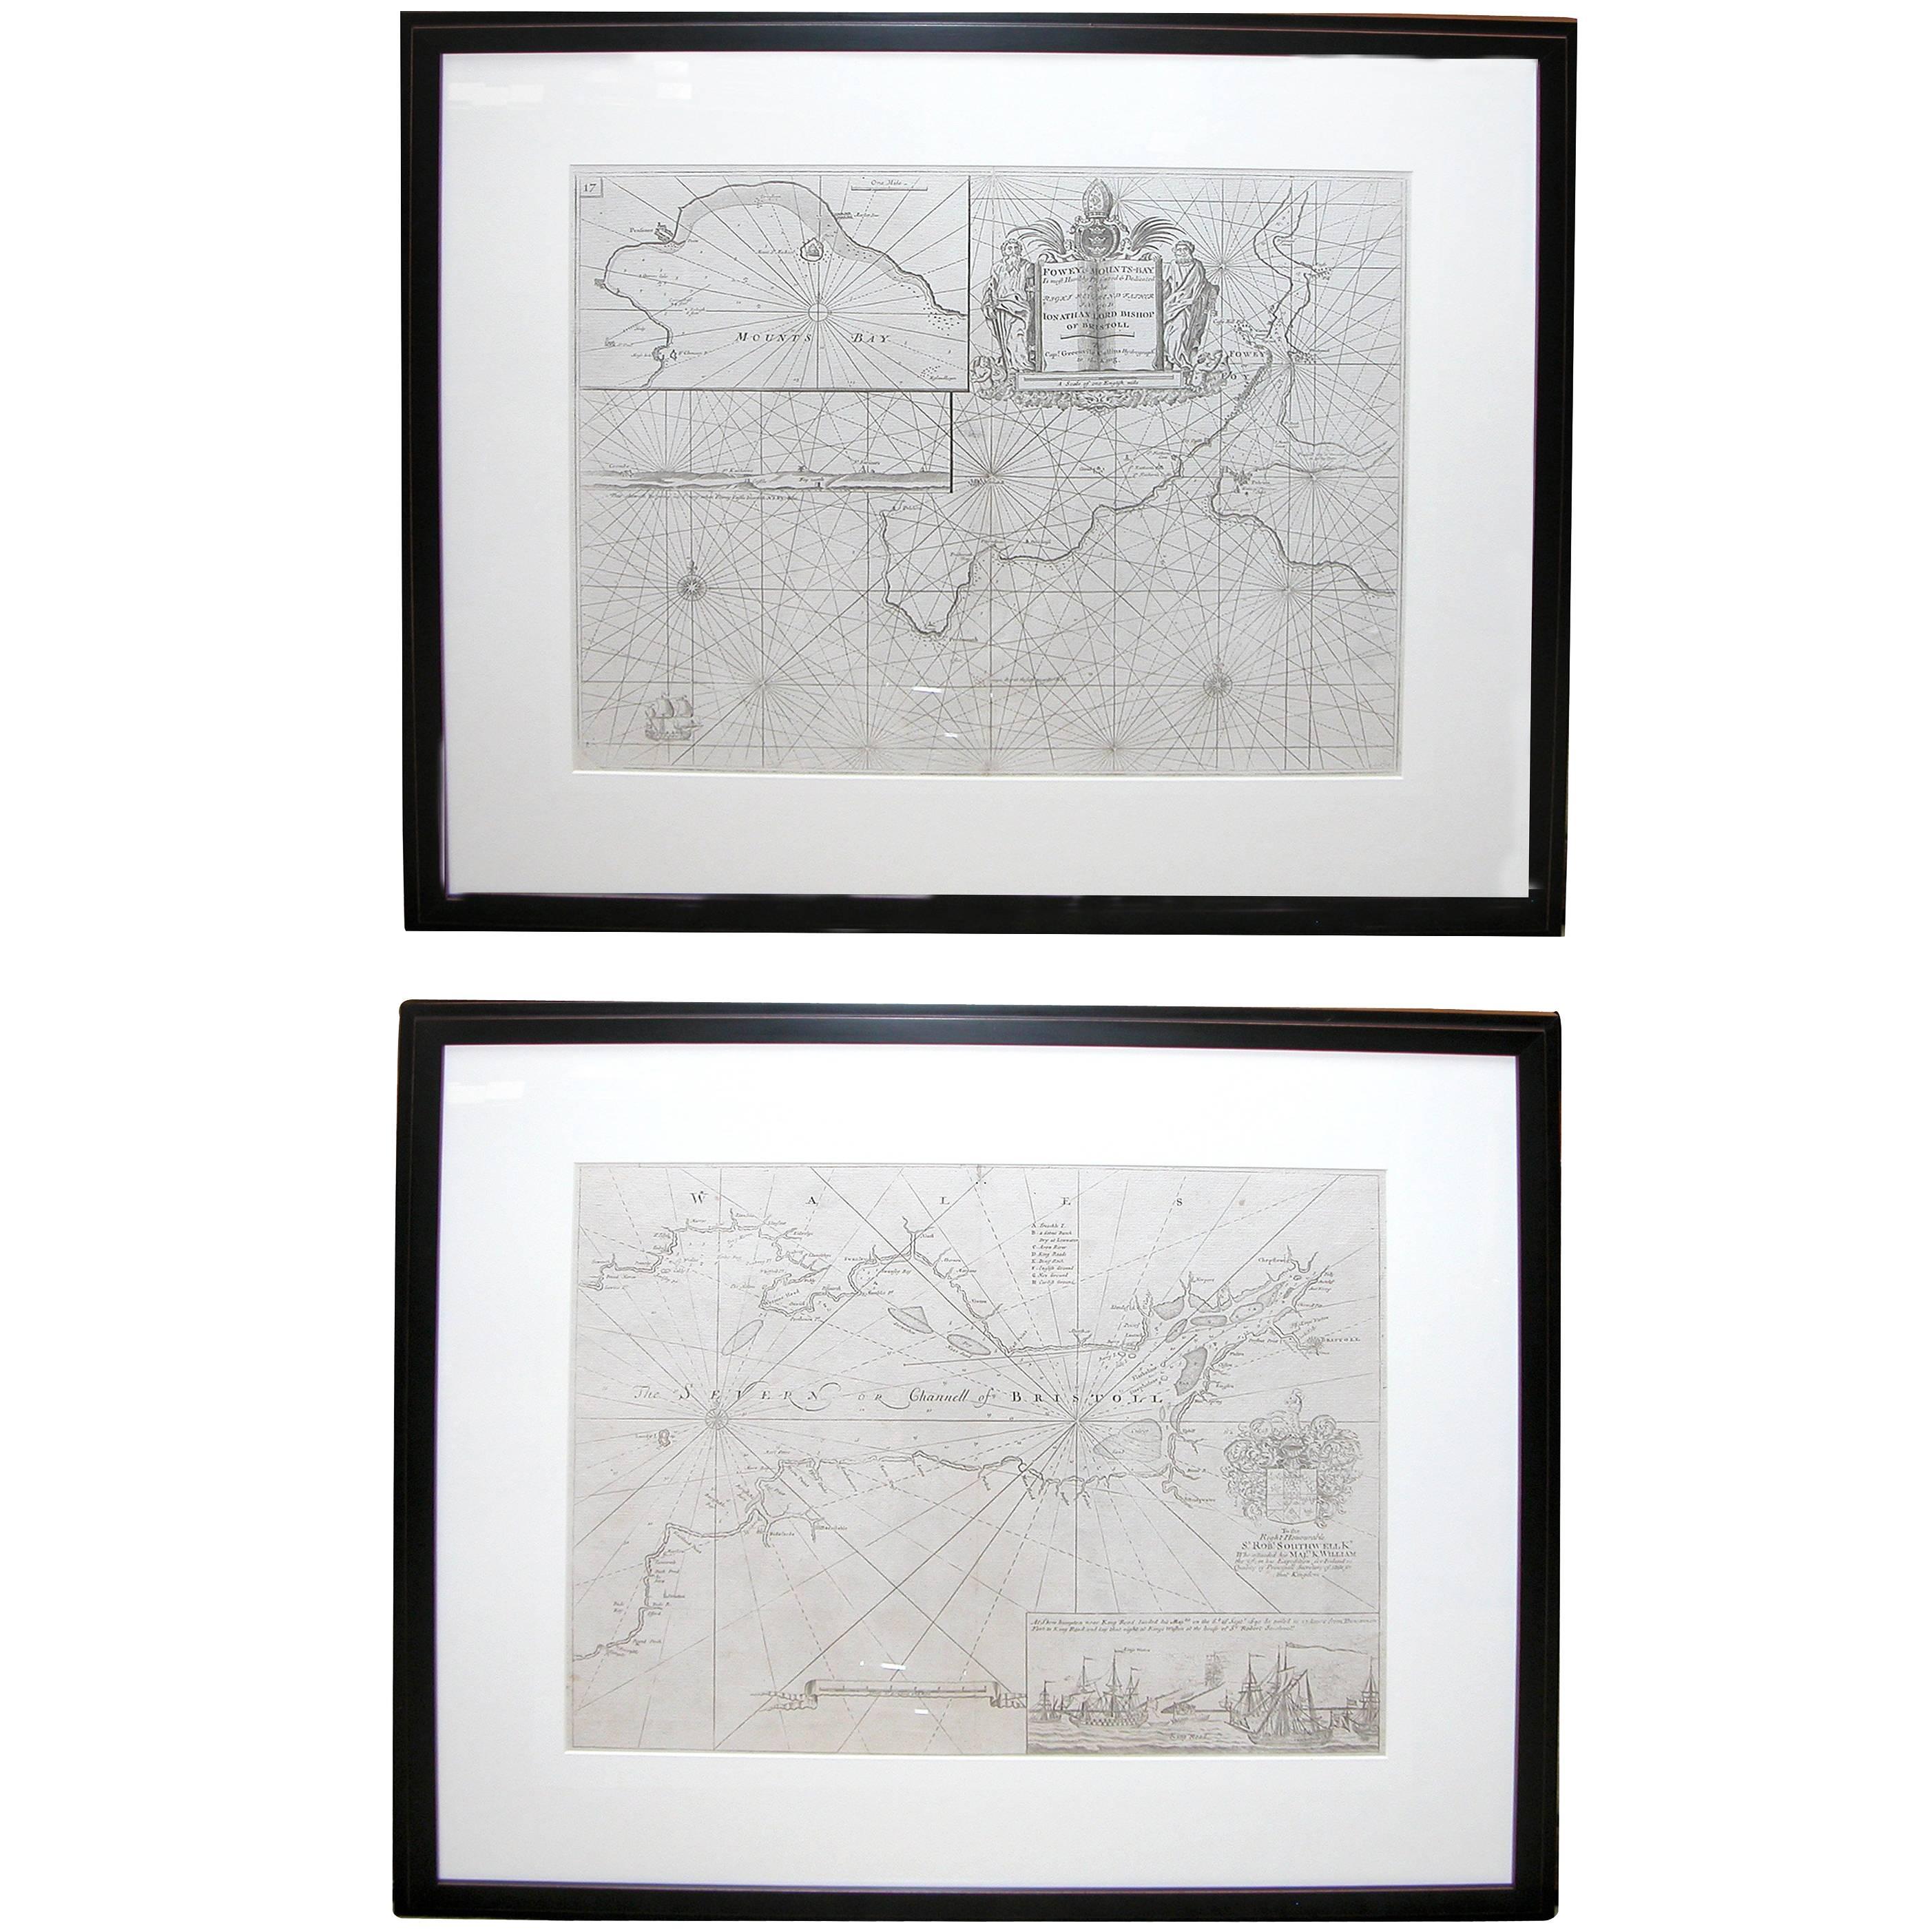 Handsome Pair of Framed Sea Charts by Captain Greenvile Collins